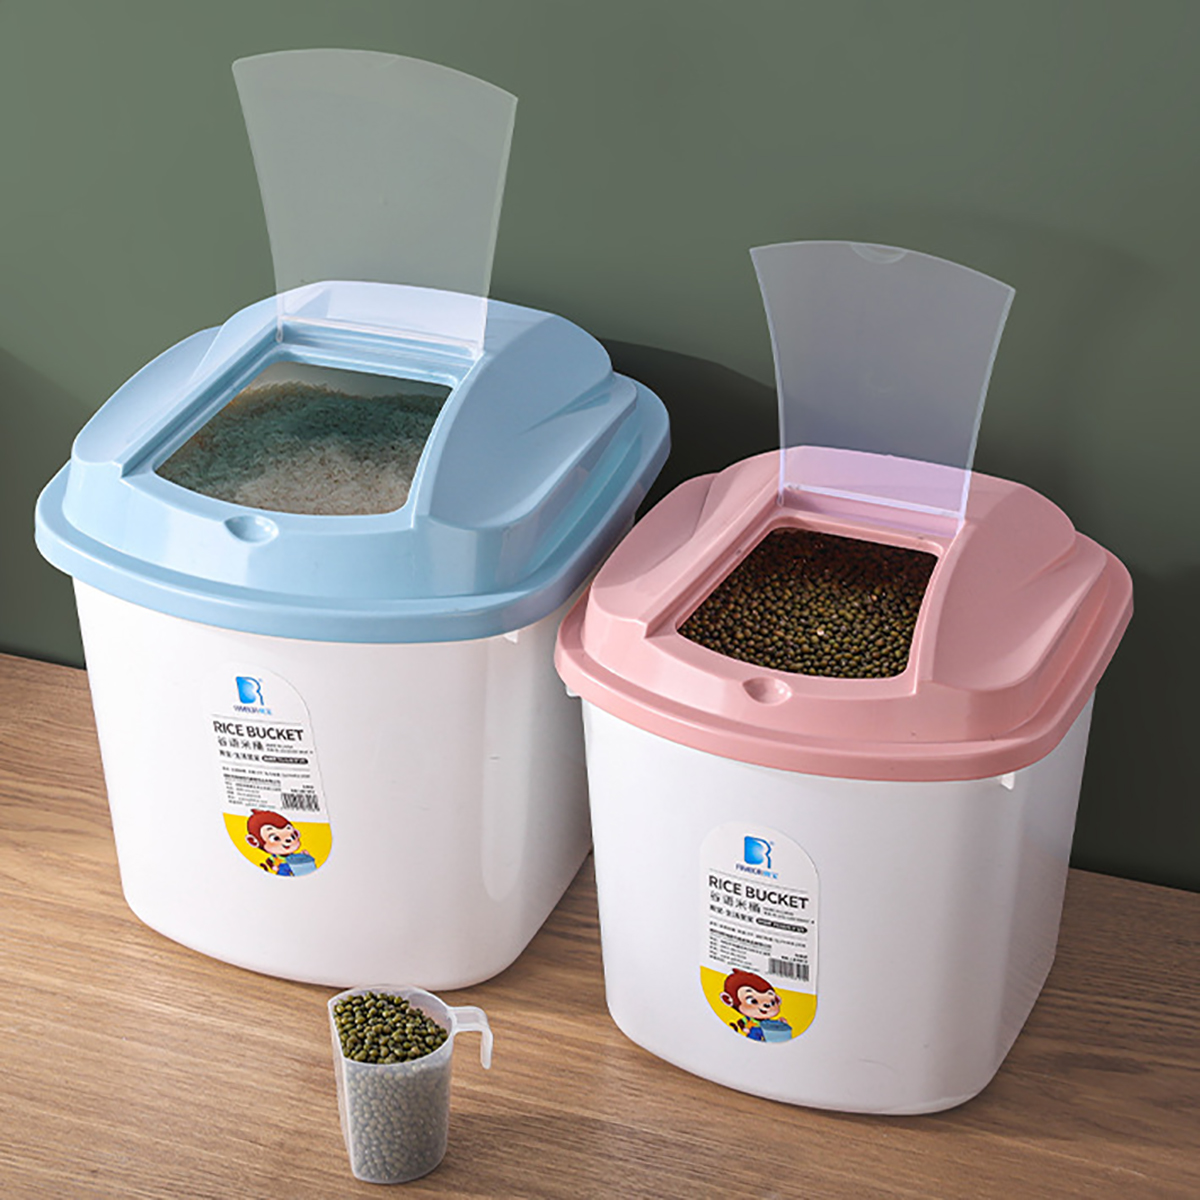 Airtight-Pet-Food-Storage-Container-Rice-Bucket-Storage-Container-Box-for-Storing-Rice-Flour-Dry-Foo-1857848-1